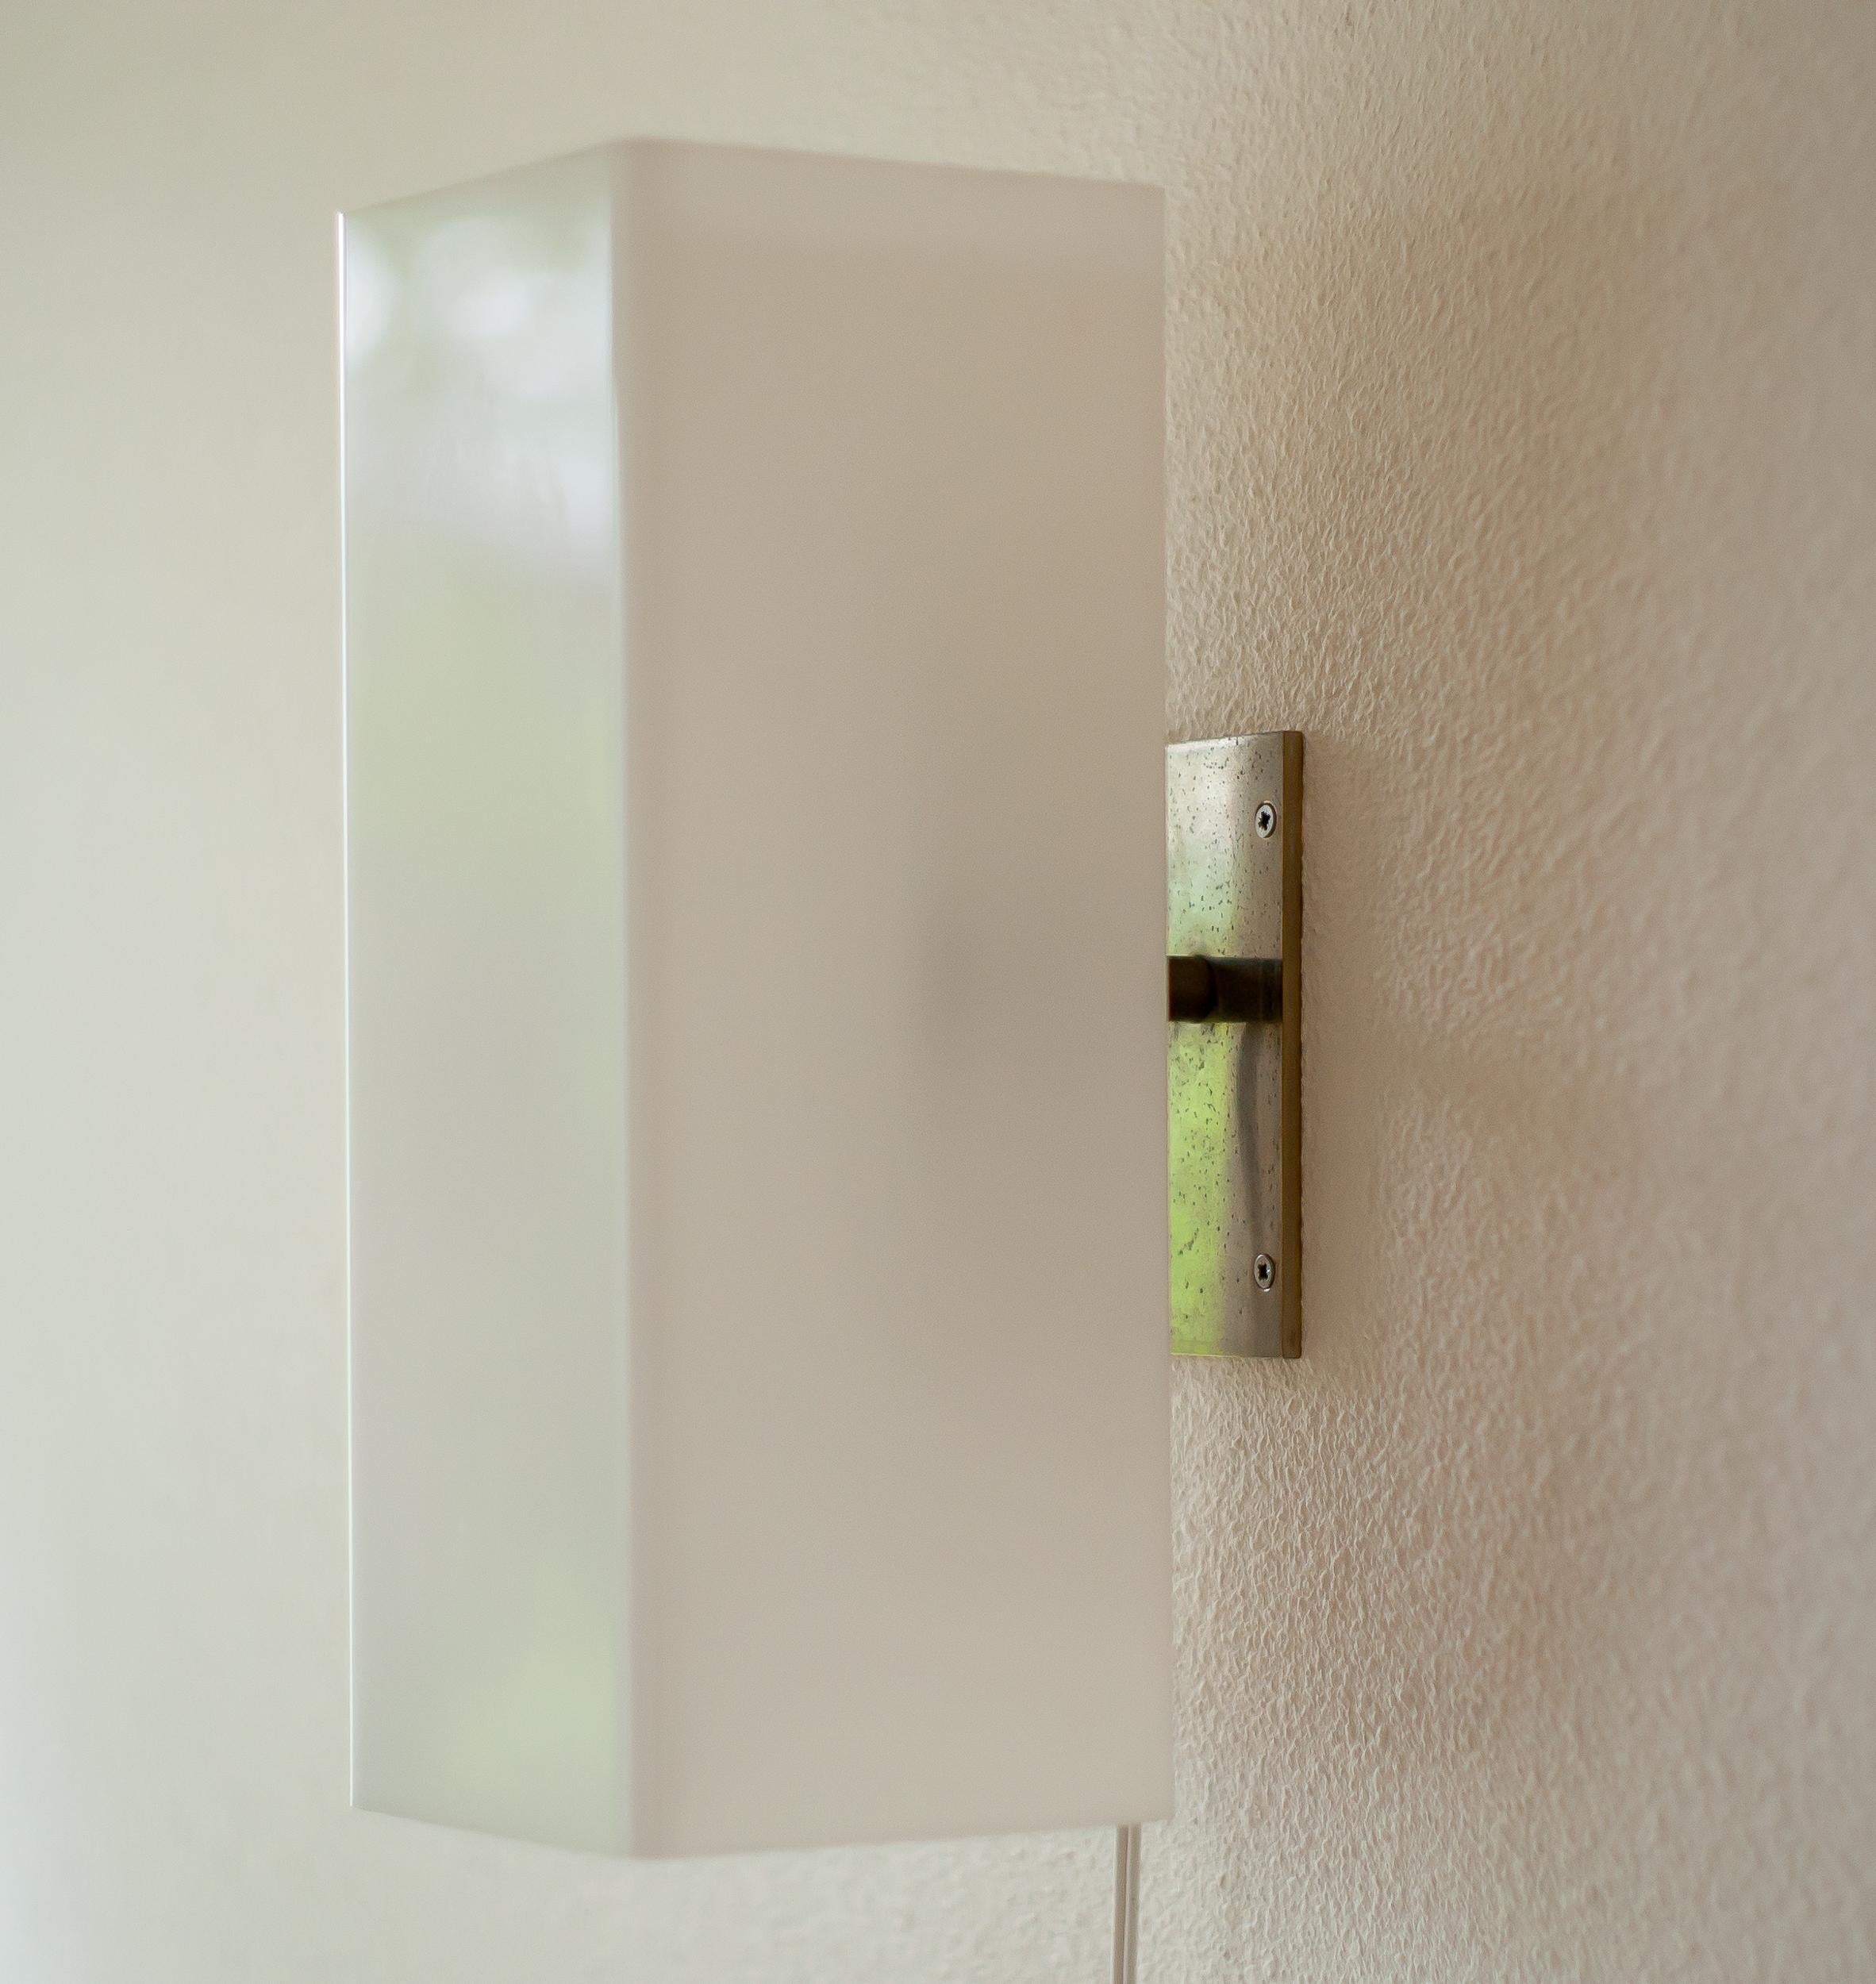 Large, well made architectural wall lamp with a nickel-plated steel frame and white Lucite shade.
The lamp came from a modernist home in Holland where it had been in use since the 1960s.
Contrary to its strict appearance, it gives a very